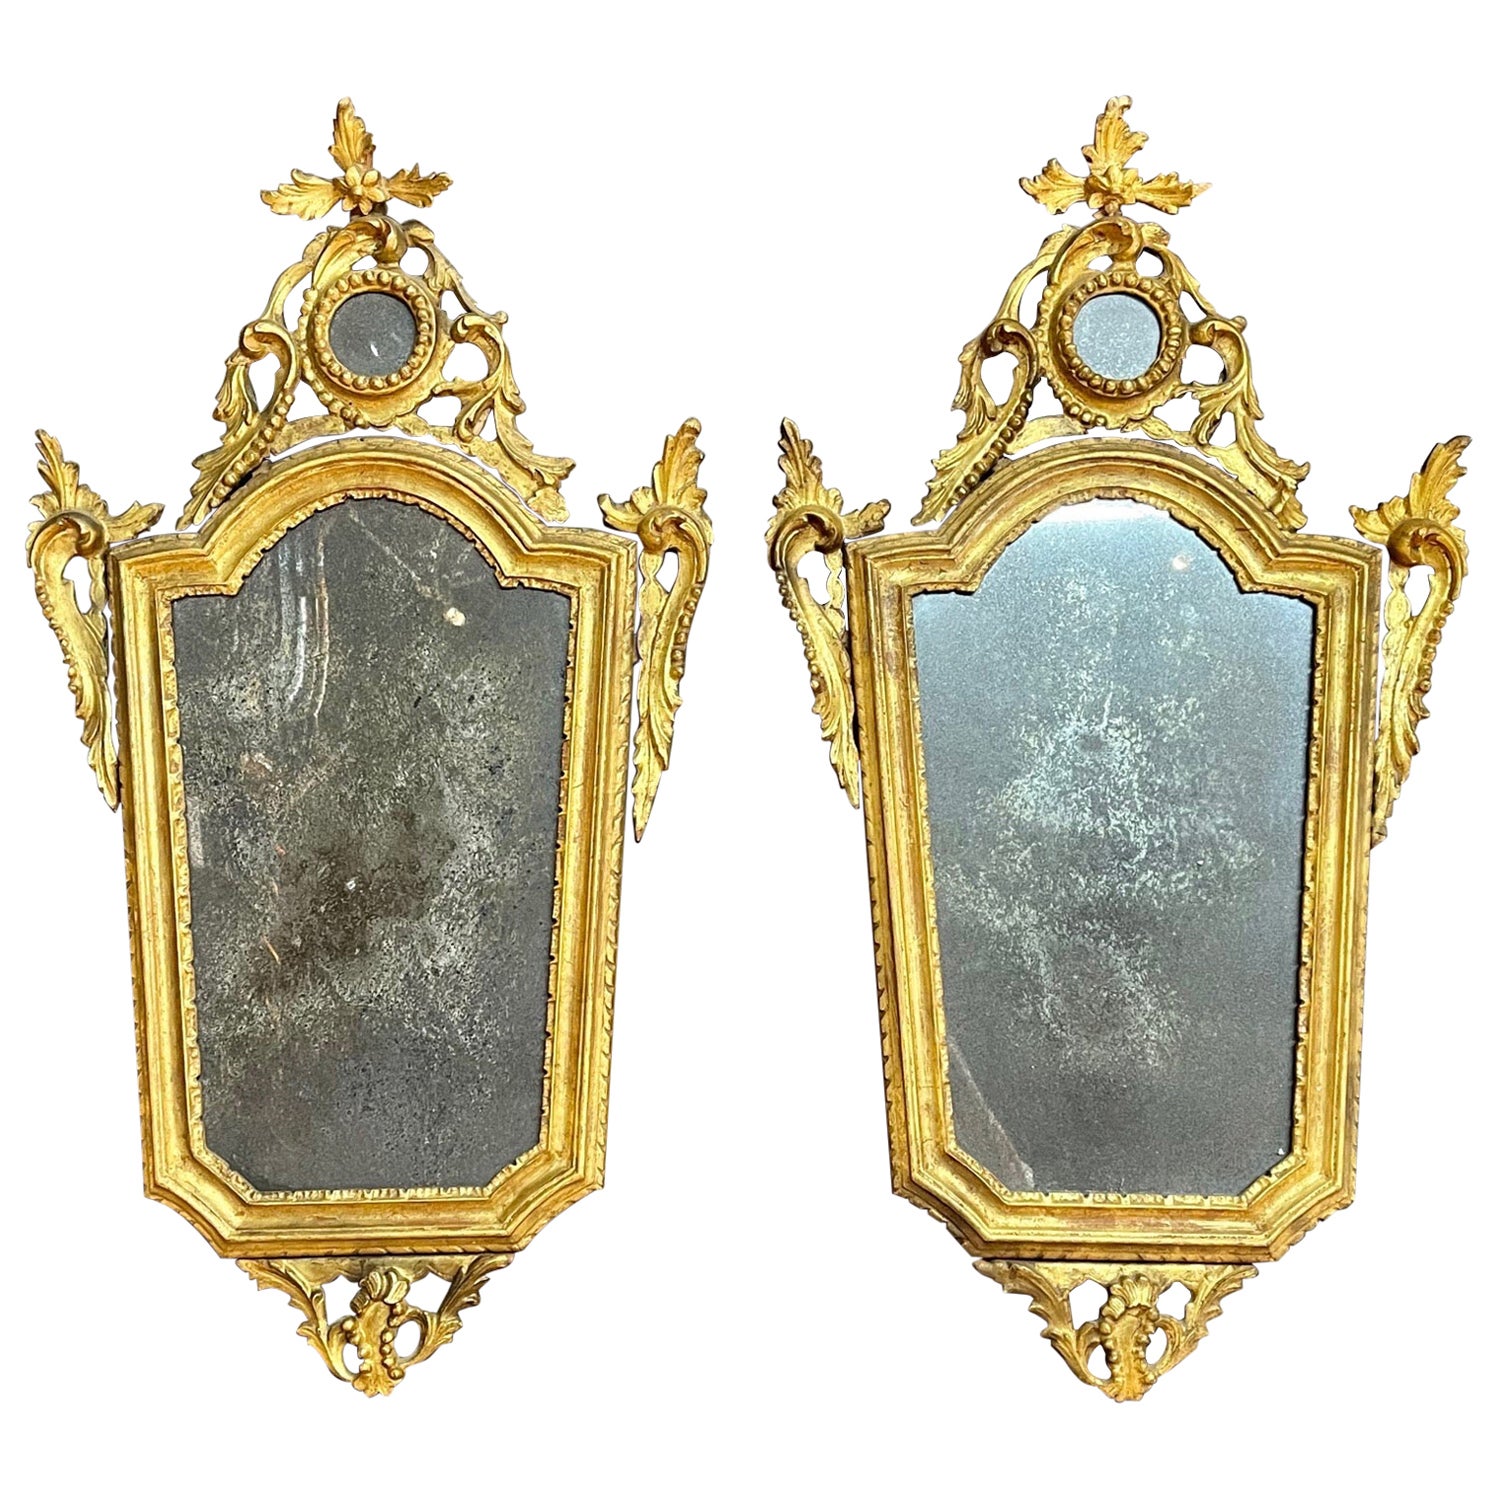 Pair of 19th Century Italian Carved and Painted Giltwood Mirrors